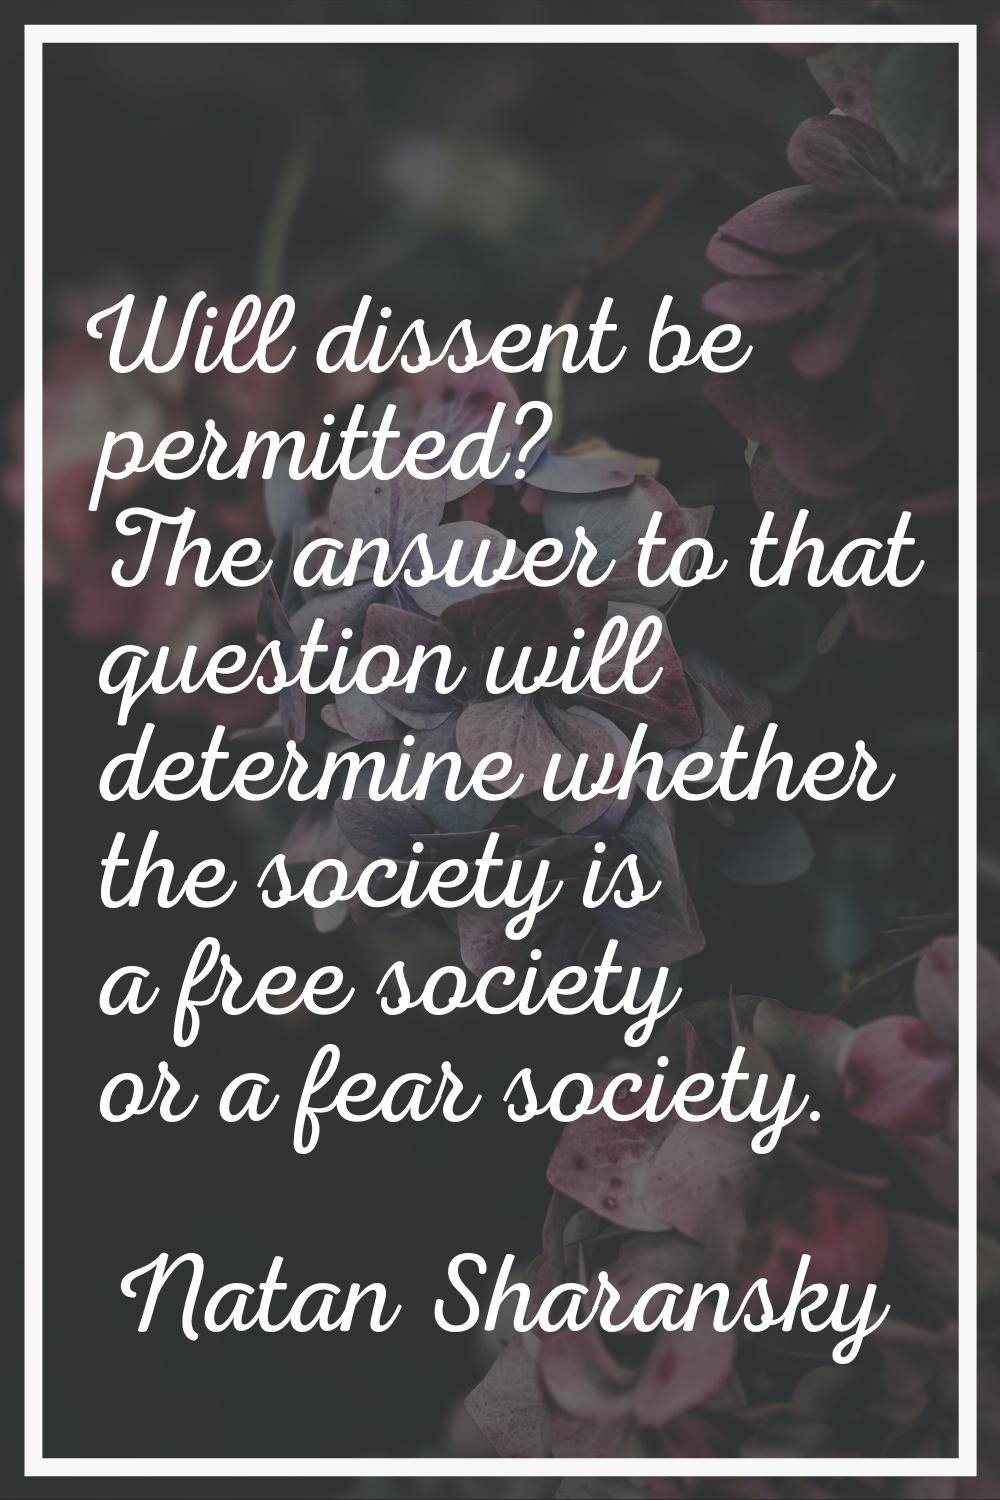 Will dissent be permitted? The answer to that question will determine whether the society is a free